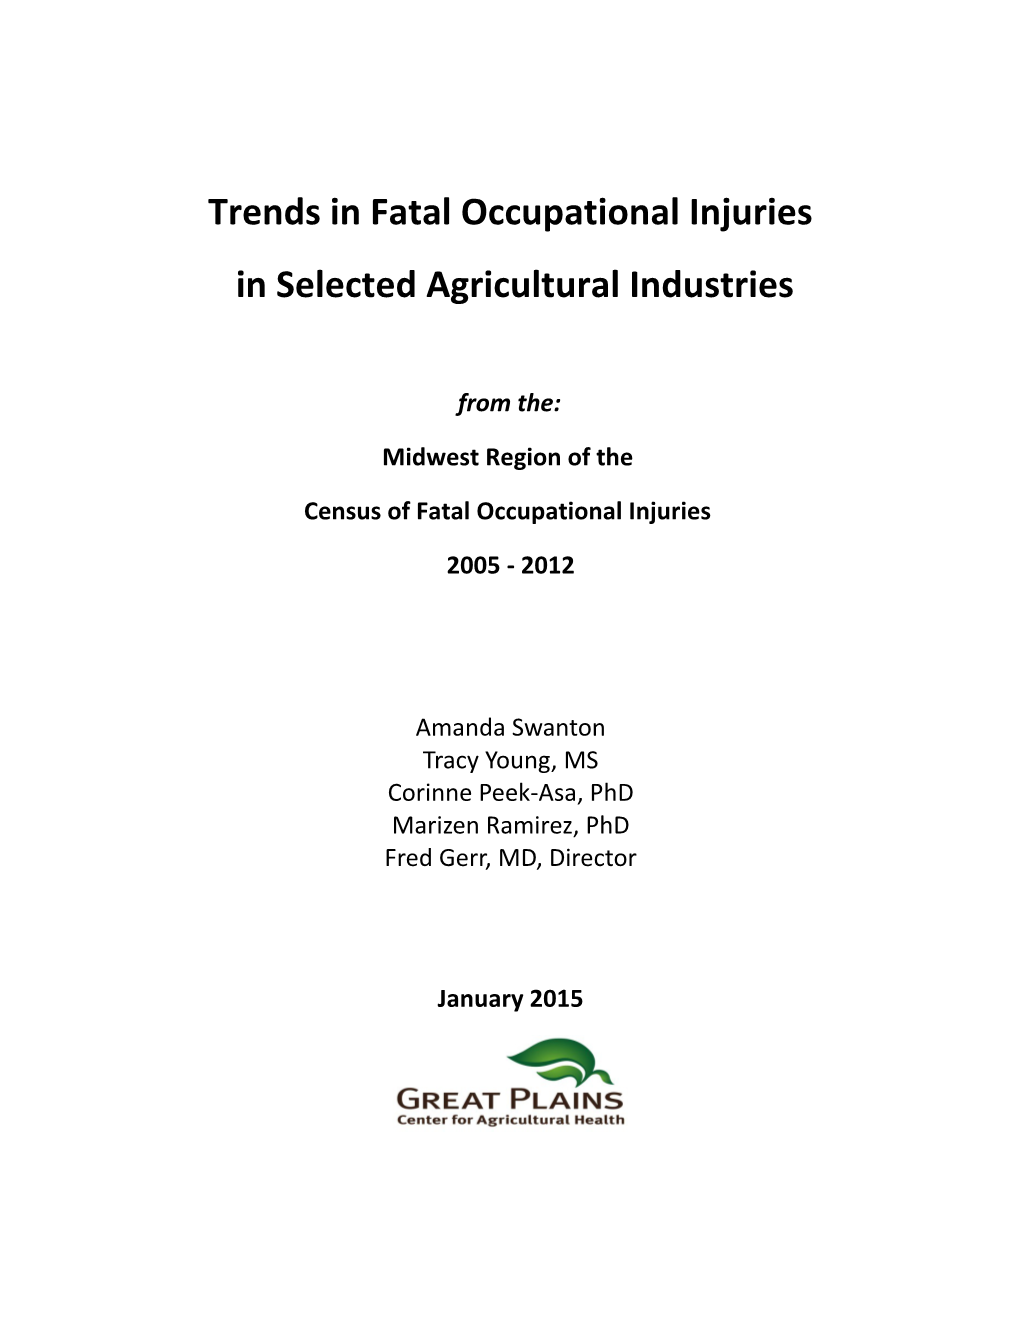 Trends in Fatal Occupational Injuries